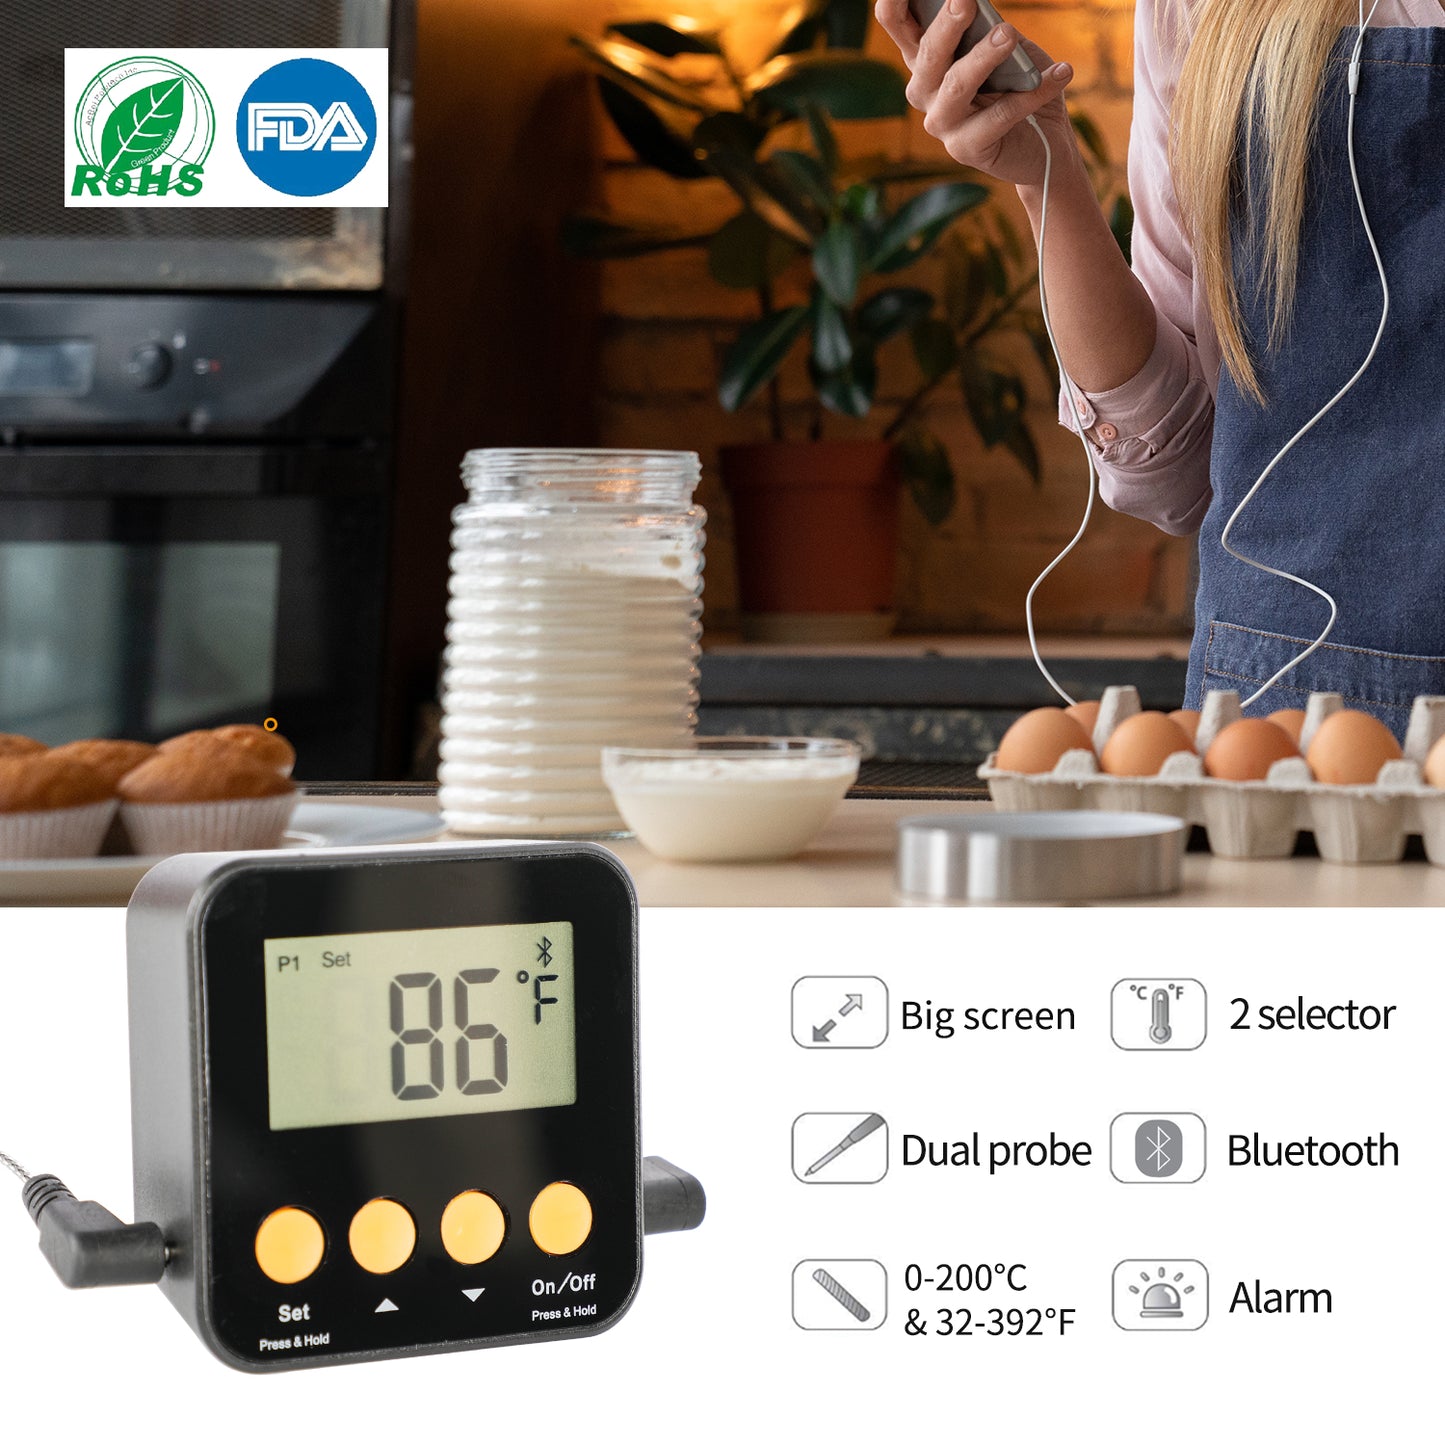 ORIENTOOLS Bluetooth BBQ Meat Thermometer Wireless Remote Thermometer Digital Cooking Thermometer with Dual Probe for Kitchen Outdoor Grill Smoker, IOS & Android Phone Supported